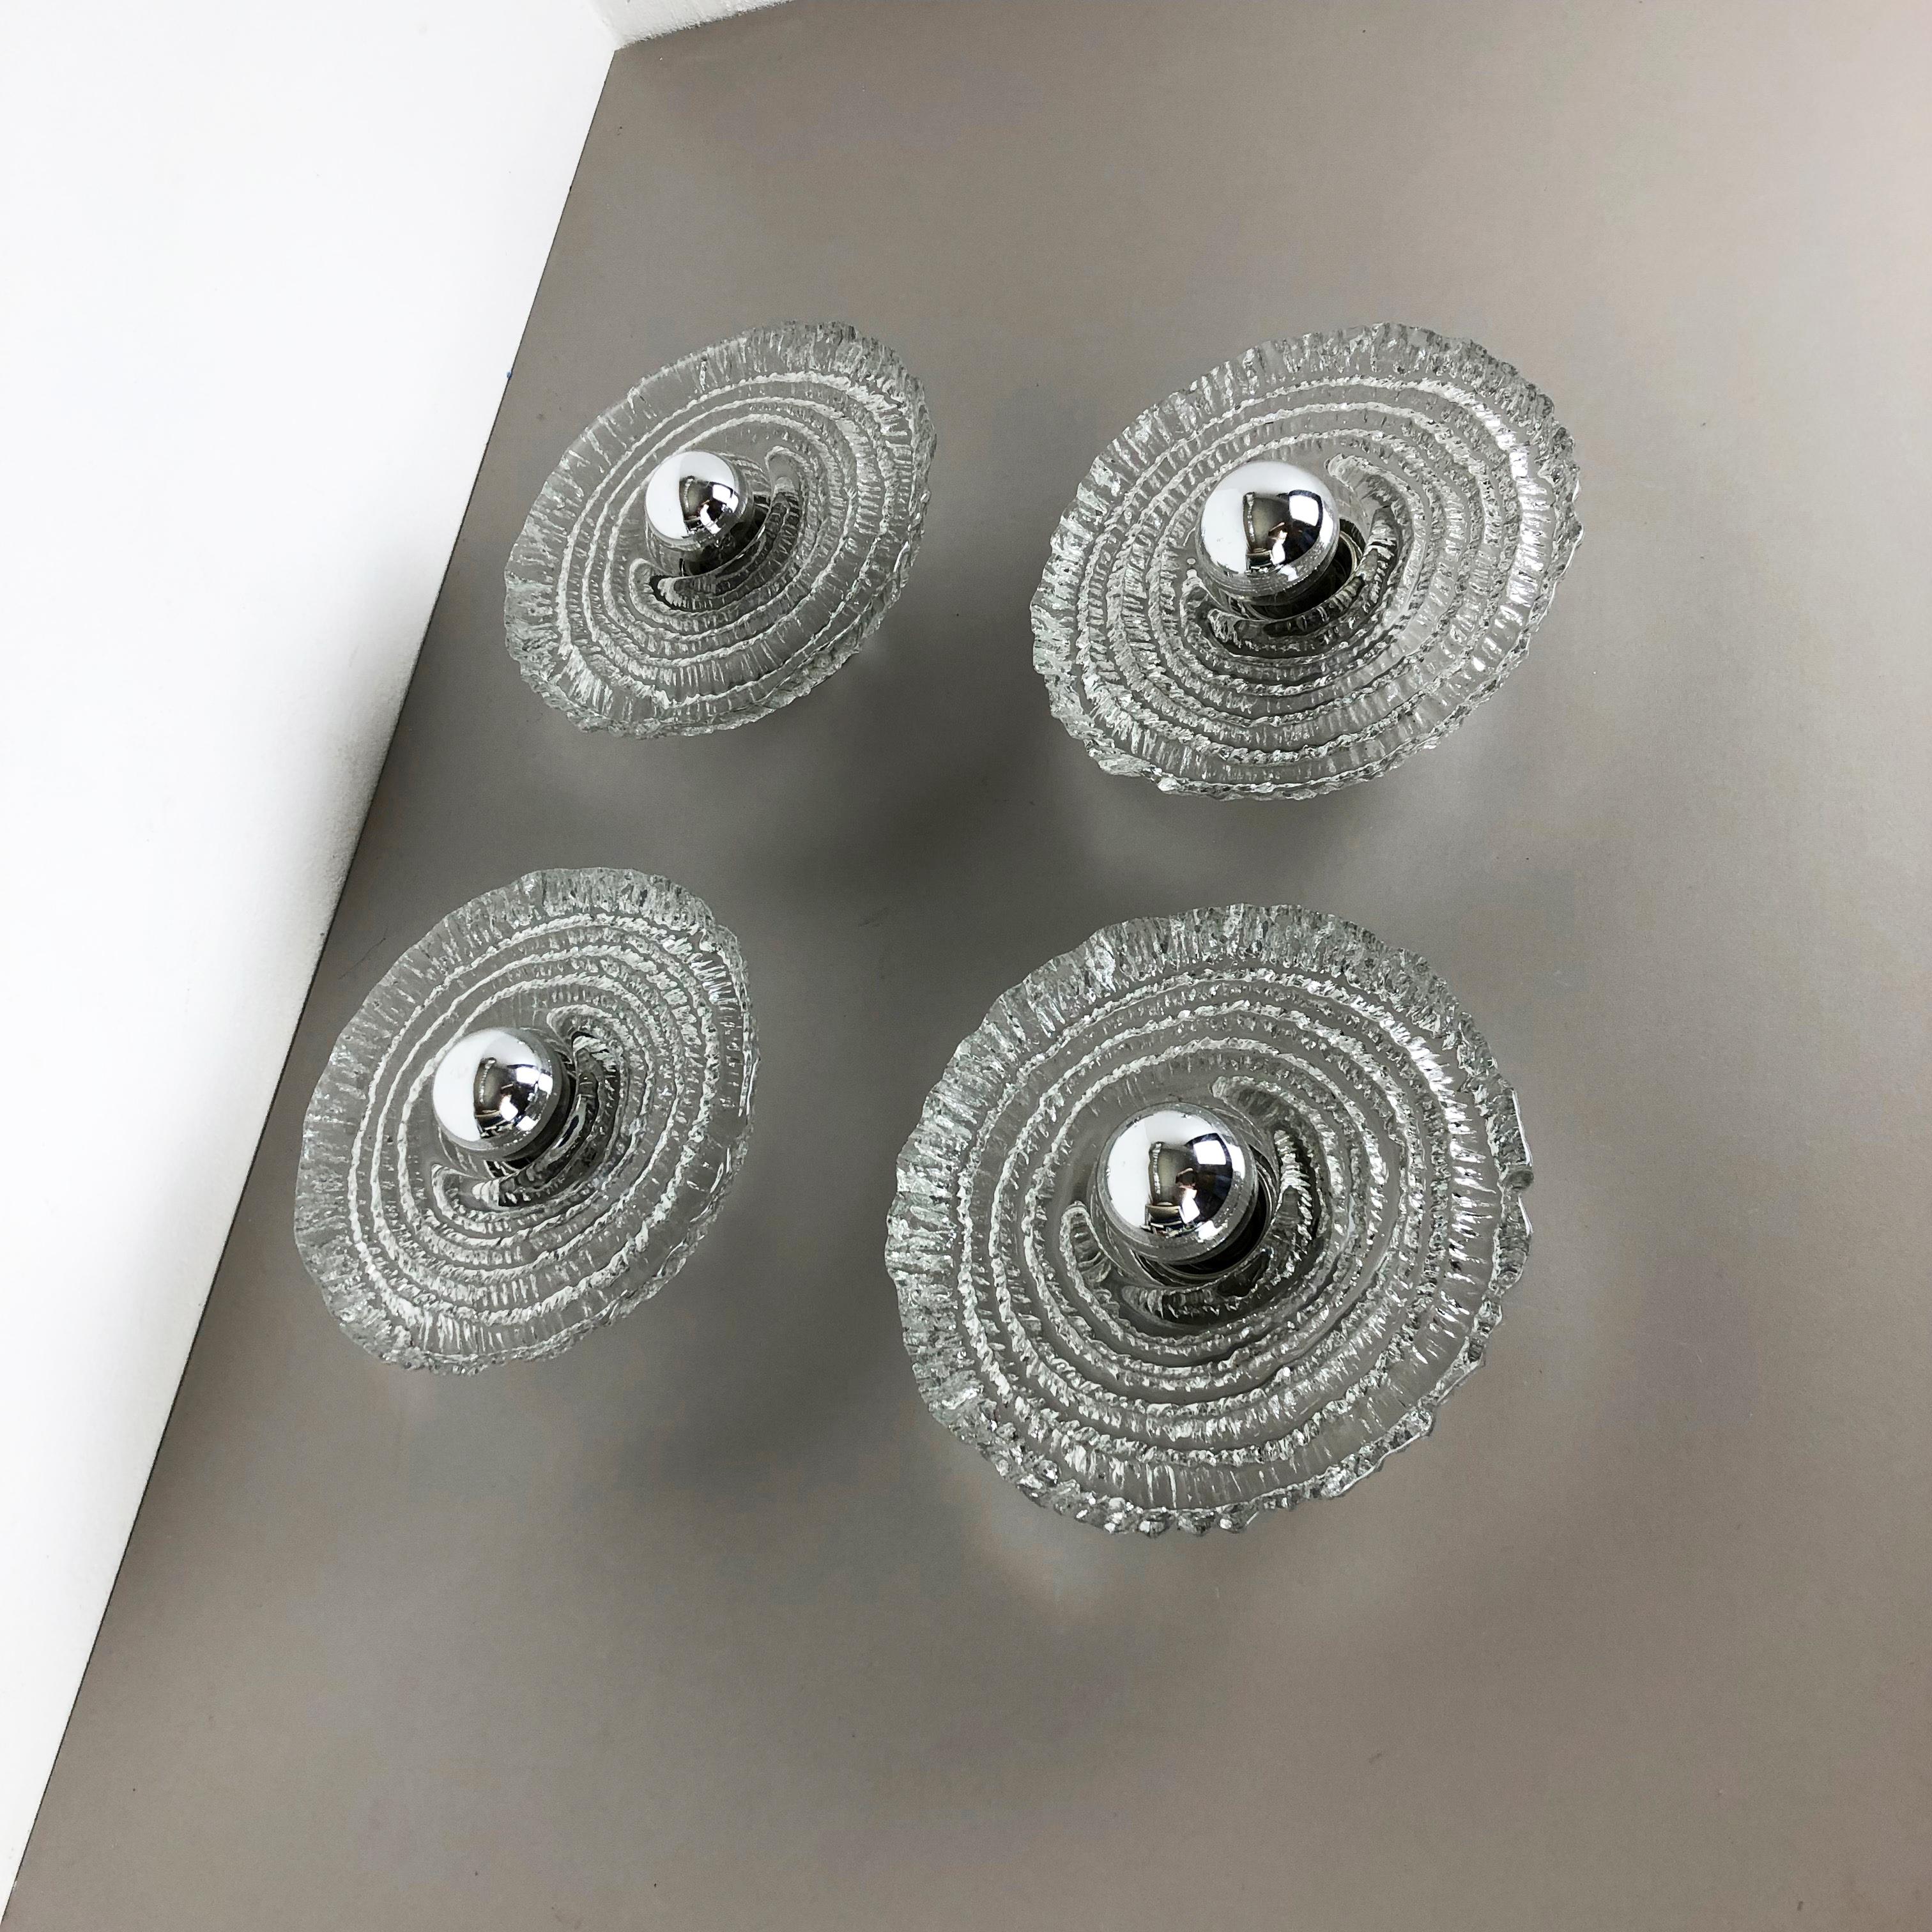 Article:

wall light set of four


Producer:

Peill and Putzler, Germany


Origin:

Germany



Age:

1970s



Original 1970s modernist German wall Light set made of glass and metal. These super rare wall lights were produced in